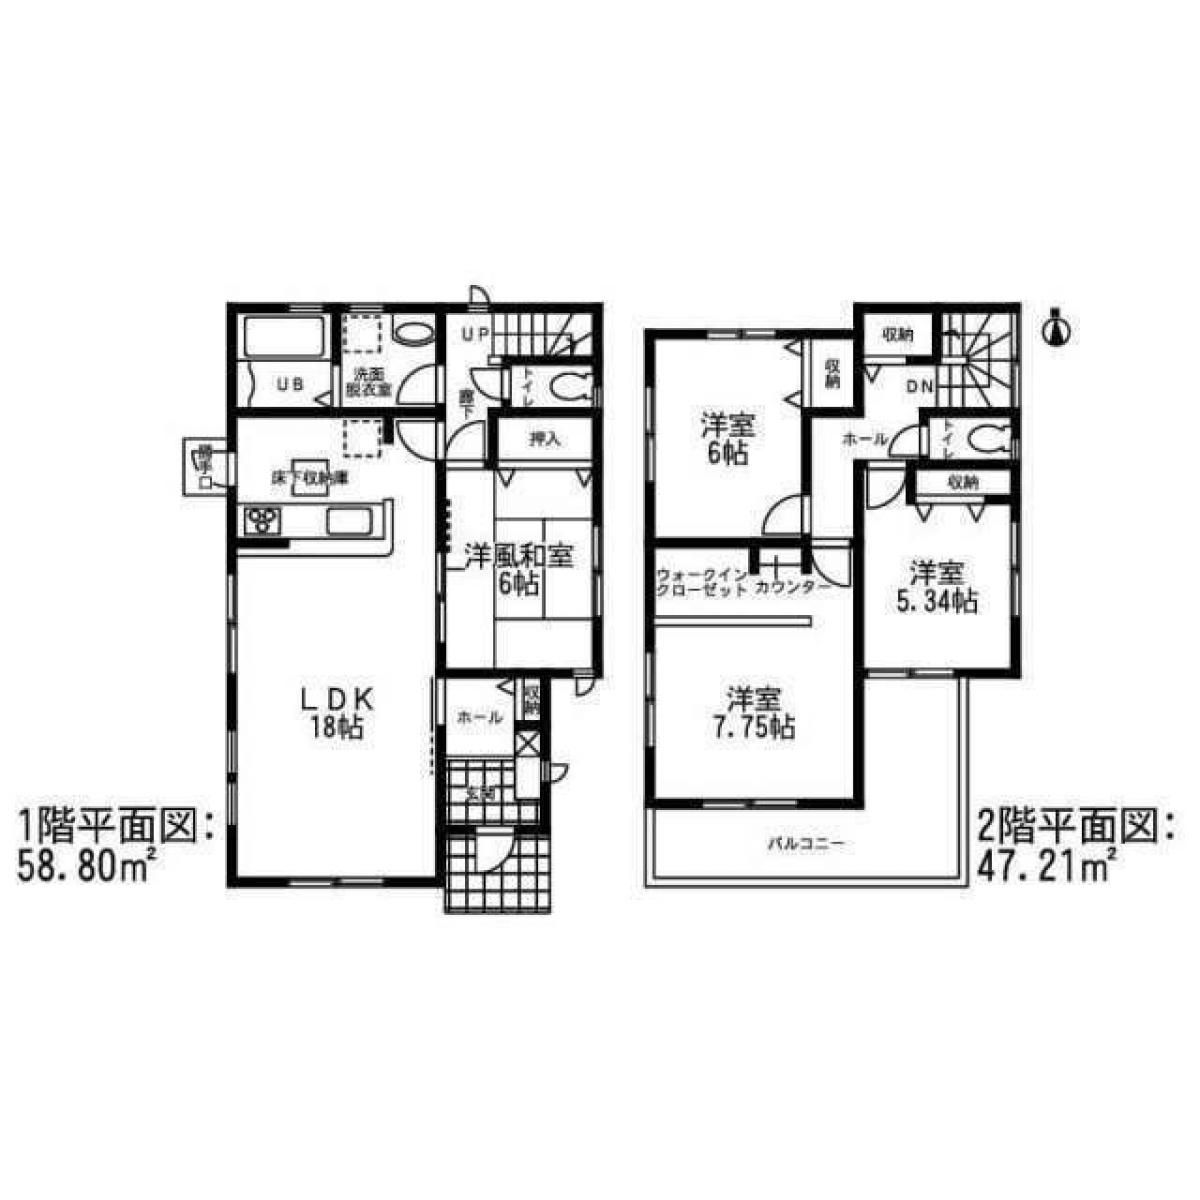 Picture of Home For Sale in Anjo Shi, Aichi, Japan